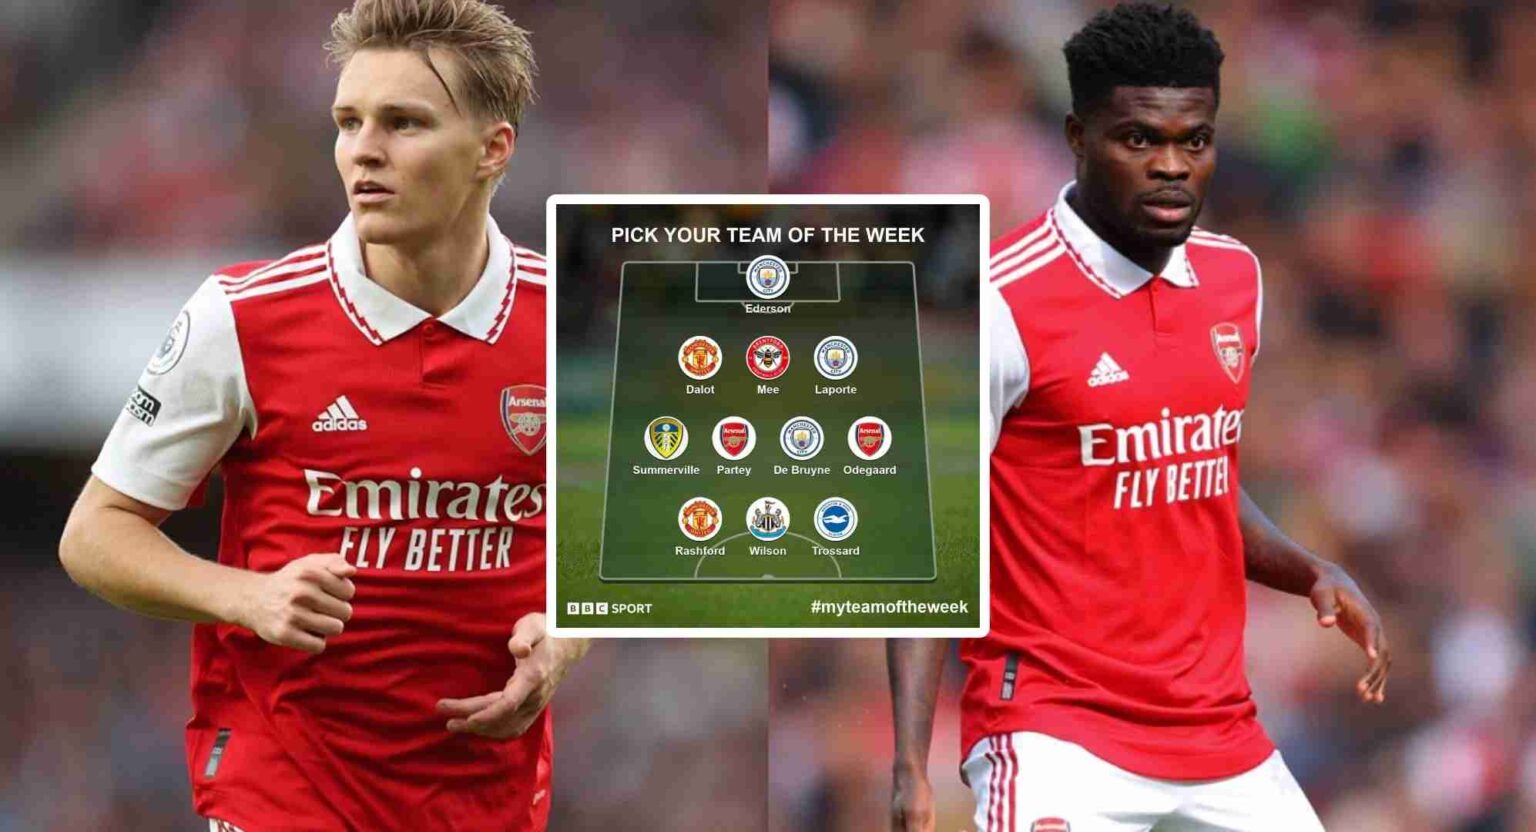 Thomas Partey and Odegaard named in BBC's Team Of The Weak